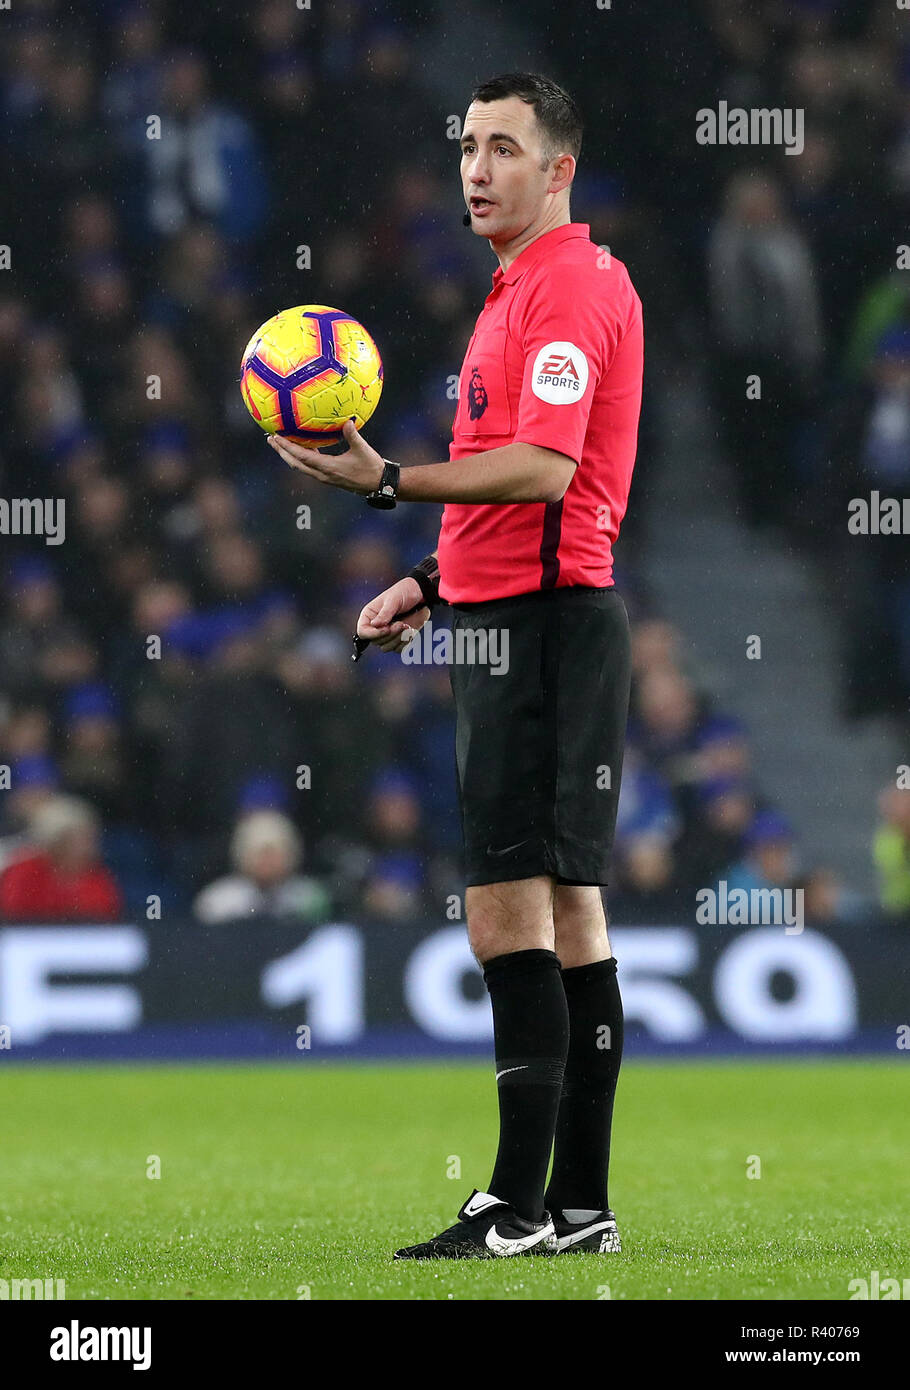 Match referee Chris Kavanagh during the Premier League match at The Amex Stadium, Brighton. PRESS ASSOCIATION Photo. Picture date: Saturday November 24, 2018. See PA story SOCCER Brighton. Photo credit should read: Gareth Fuller/PA Wire. RESTRICTIONS: No use with unauthorised audio, video, data, fixture lists, club/league logos or 'live' services. Online in-match use limited to 75 images, no video emulation. No use in betting, games or single club/league/player publications. Stock Photo